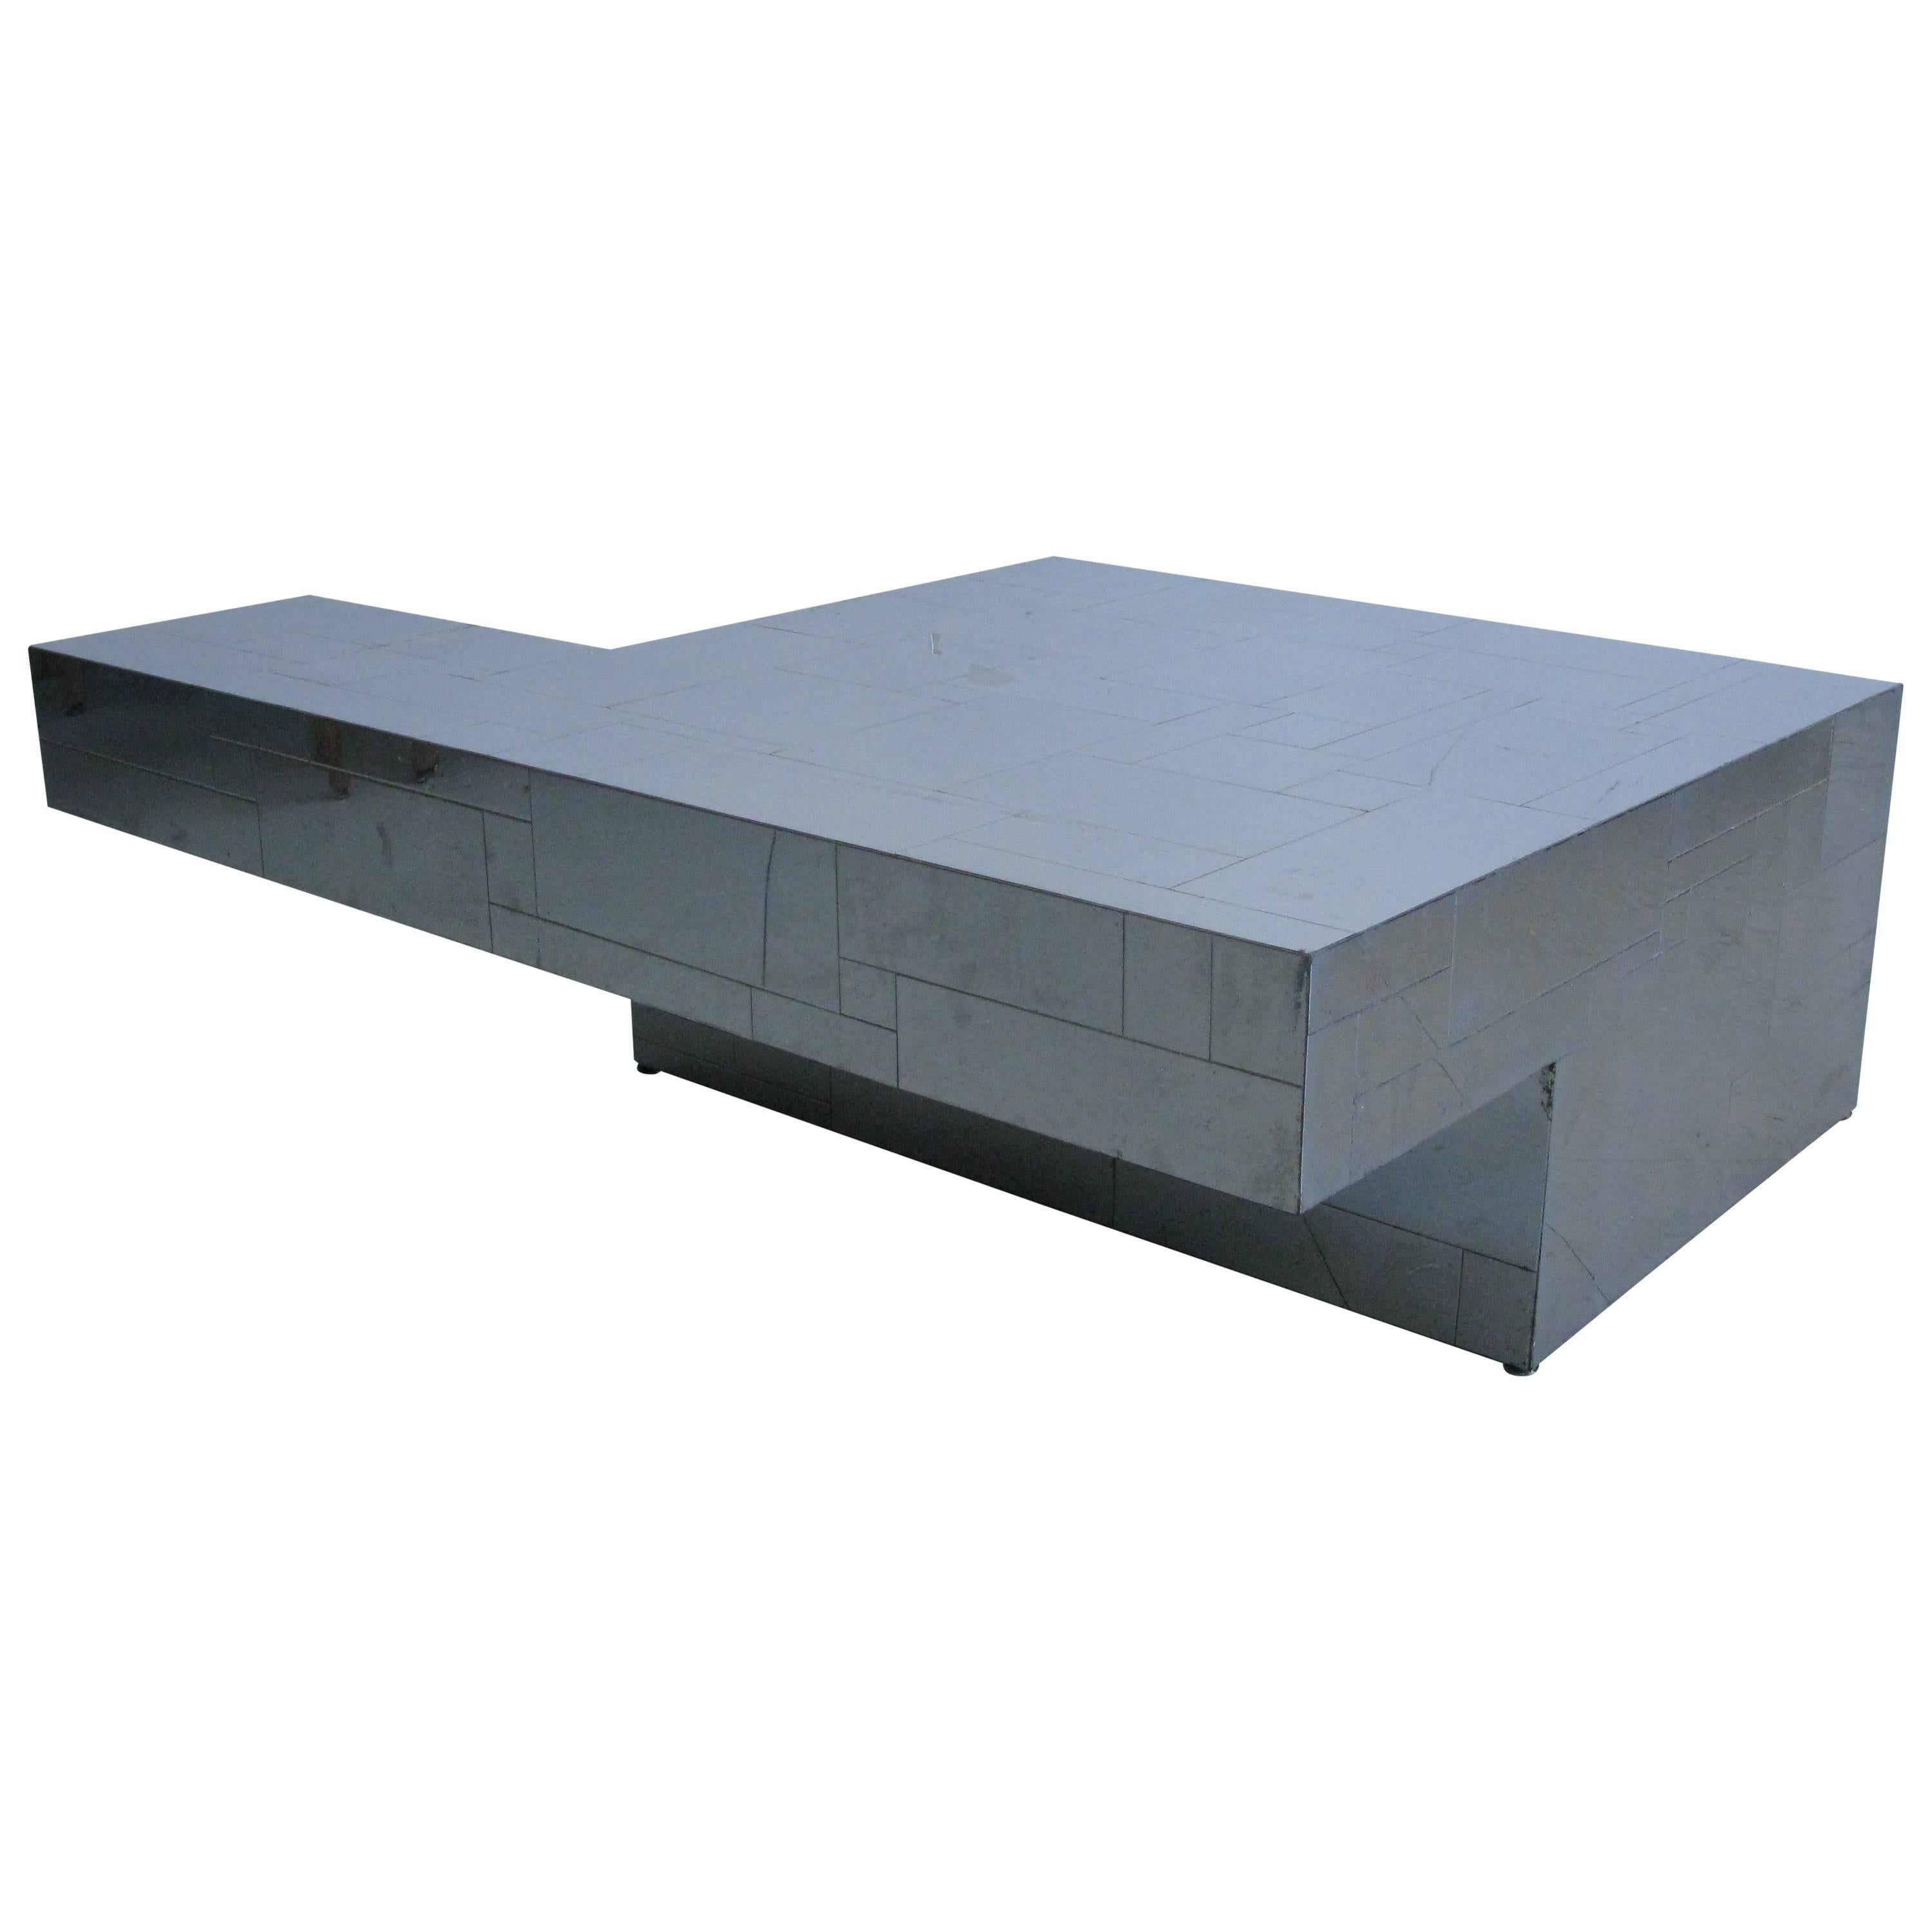 1970s Cantilever Cityscape Coffee Table by Paul Evans